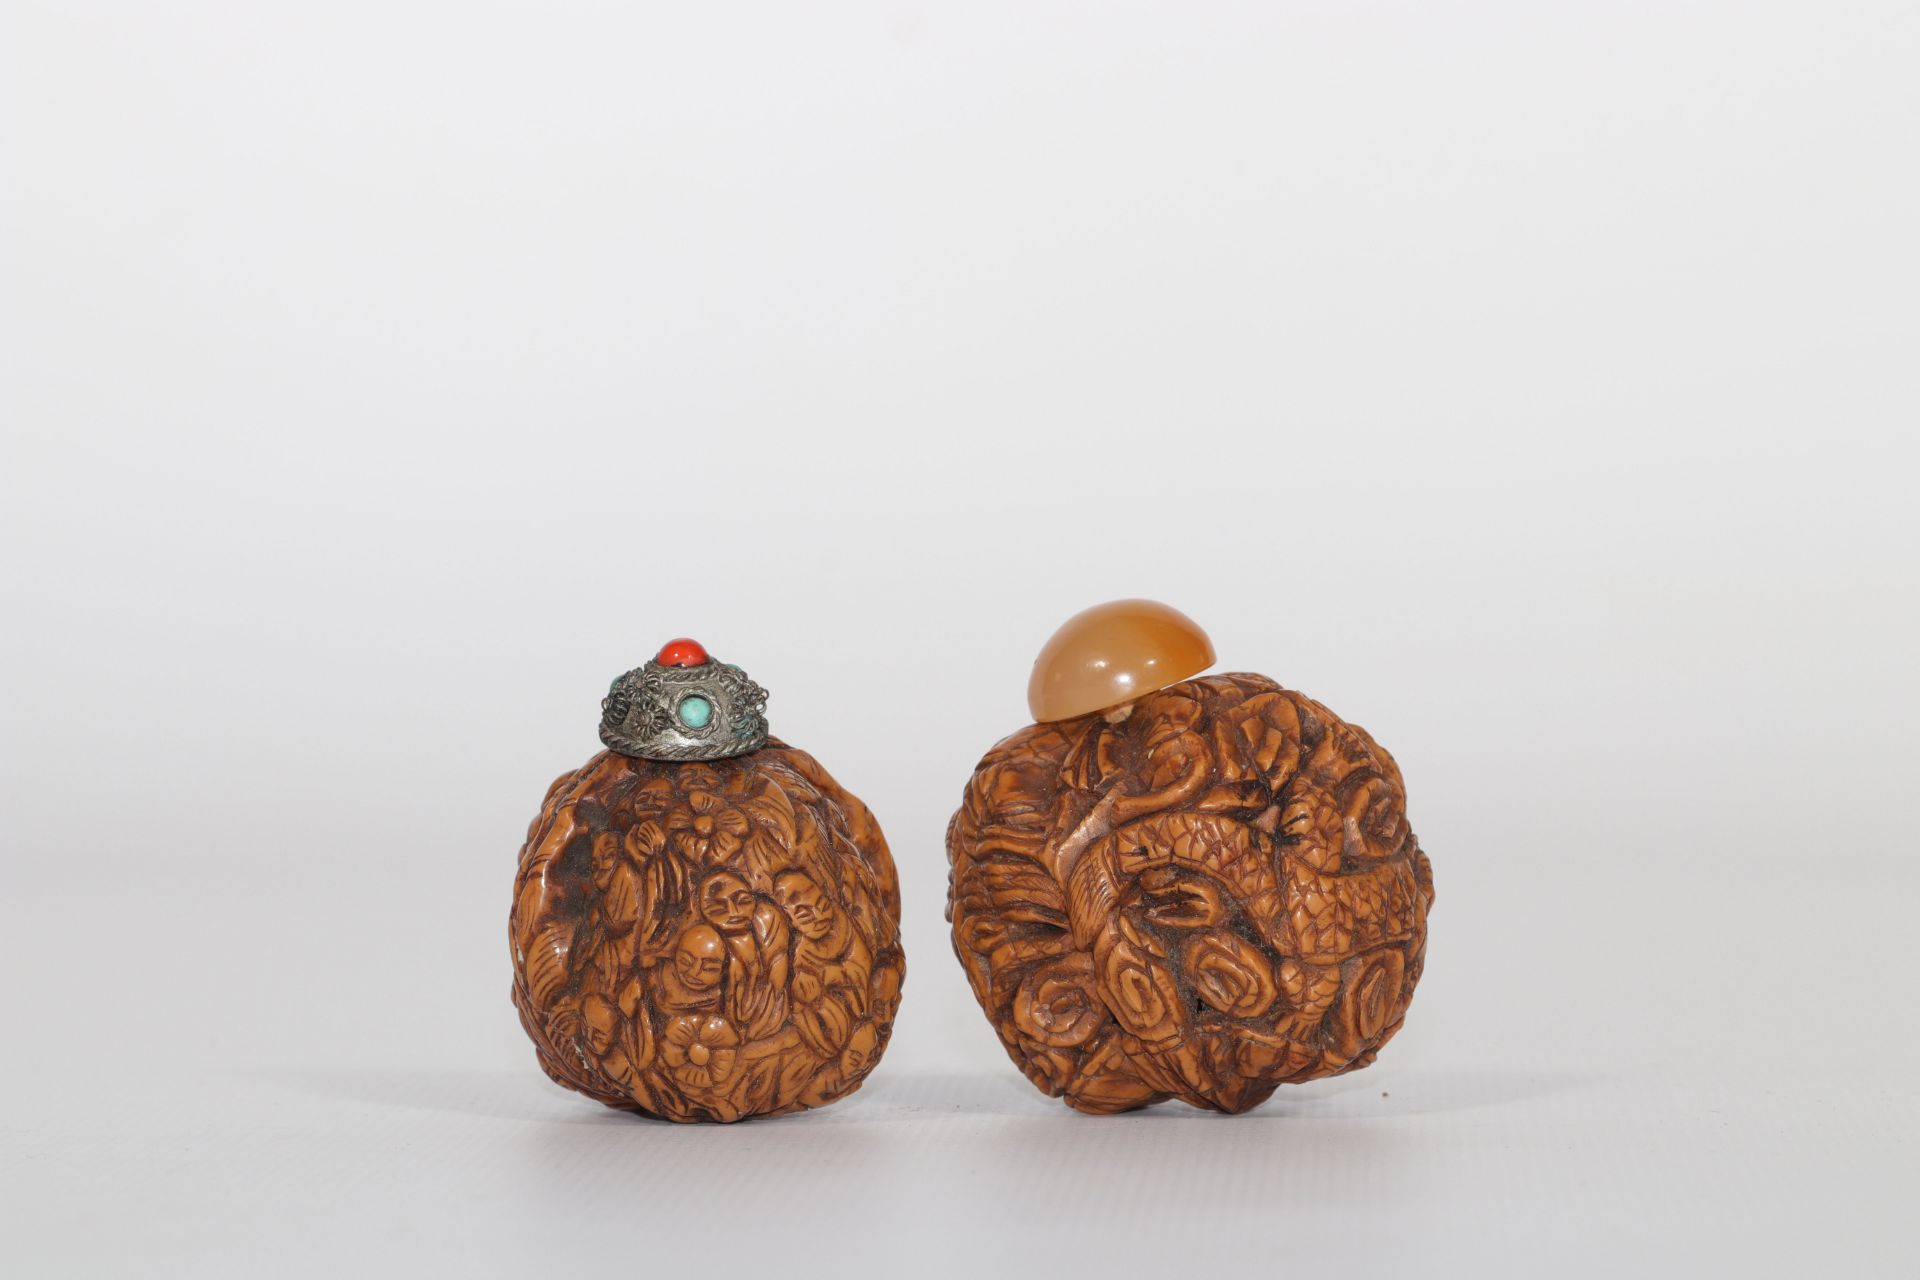 China snuffboxes (2) walnuts carved with characters - Image 2 of 2